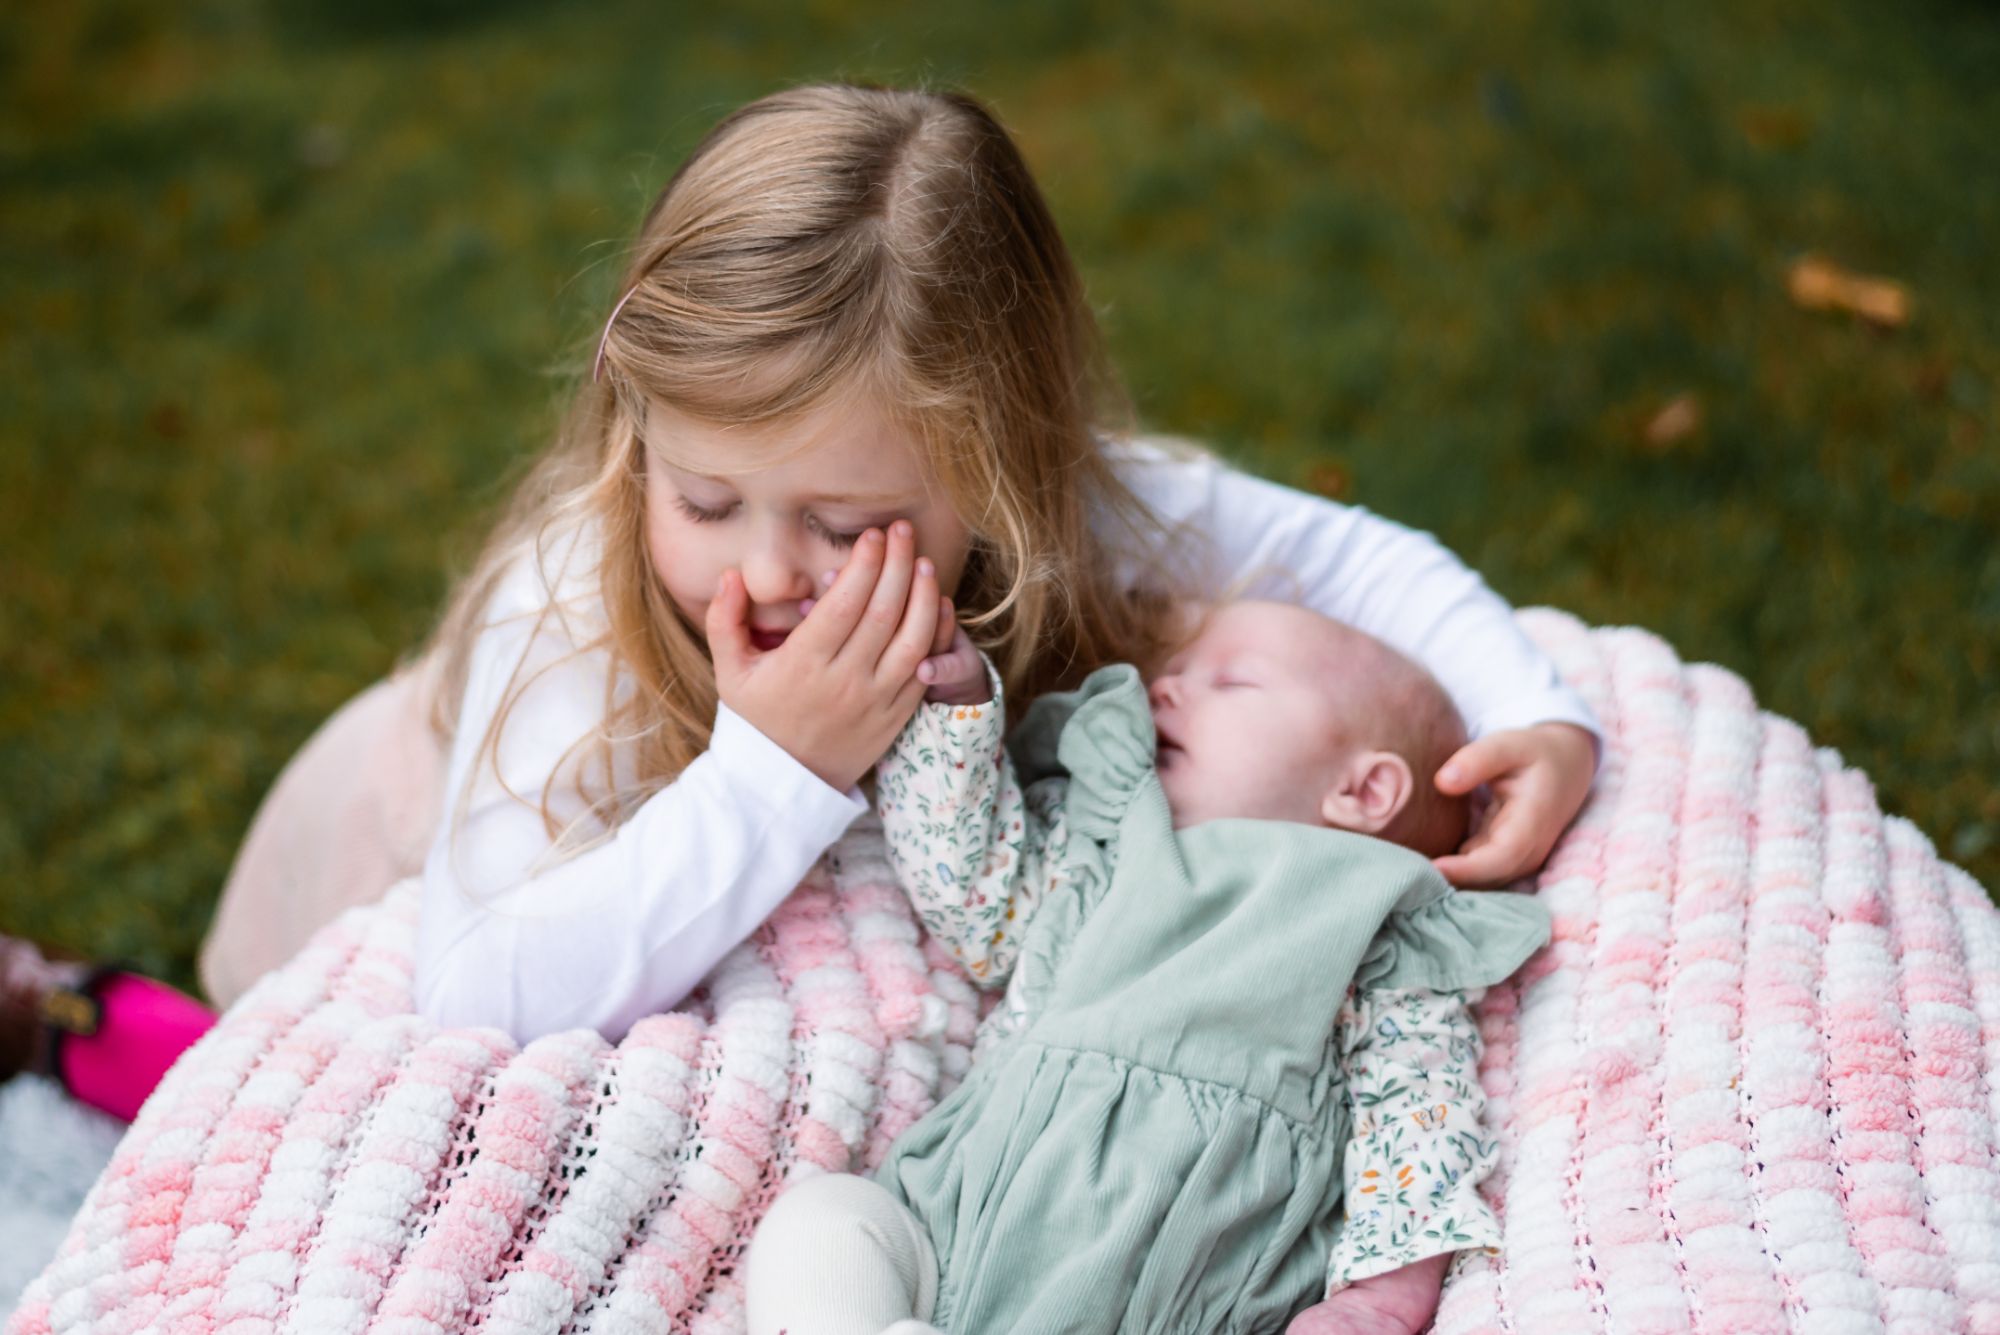 A big sister who's 4 is kneeling next to her new baby sister and is holding her tiny hand against her cheek. they both have their eyes closed